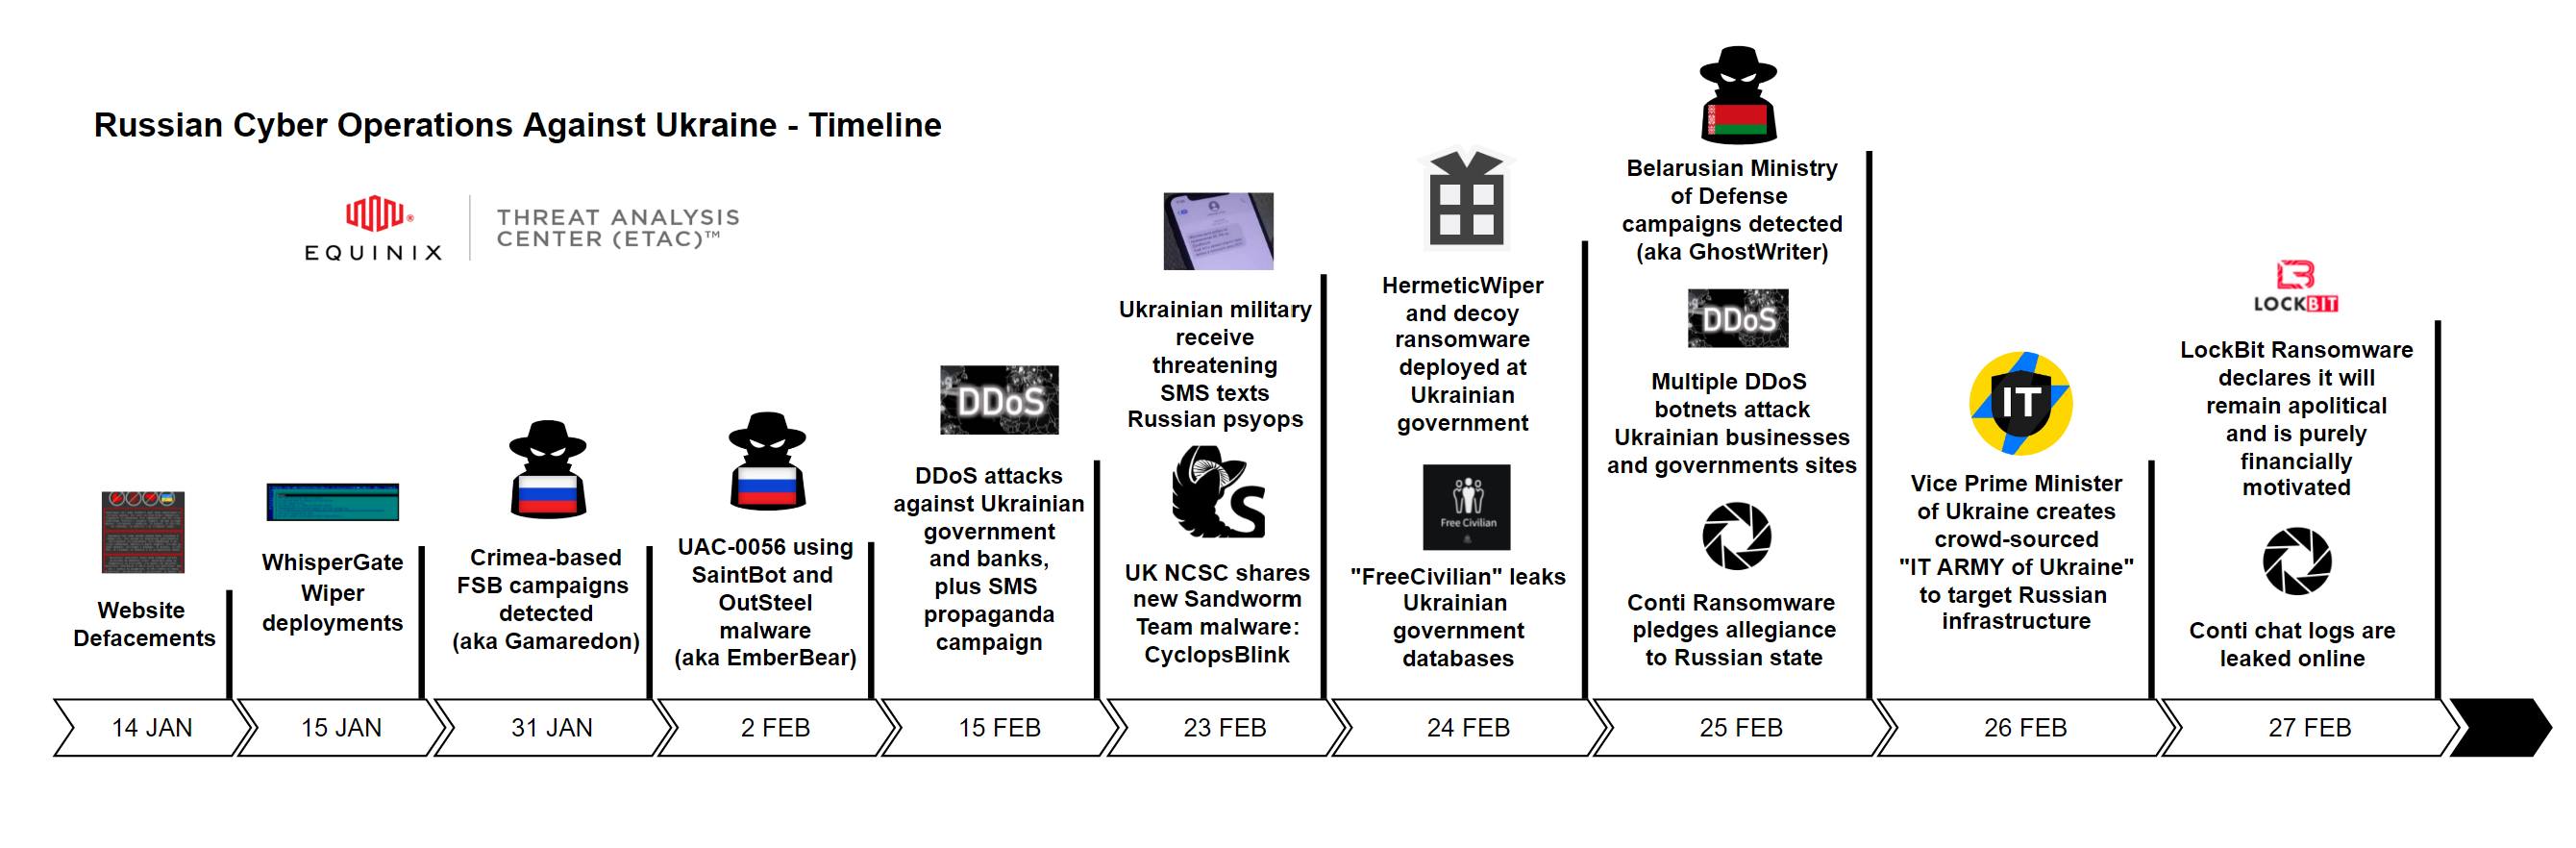 oprussia-timeline.png